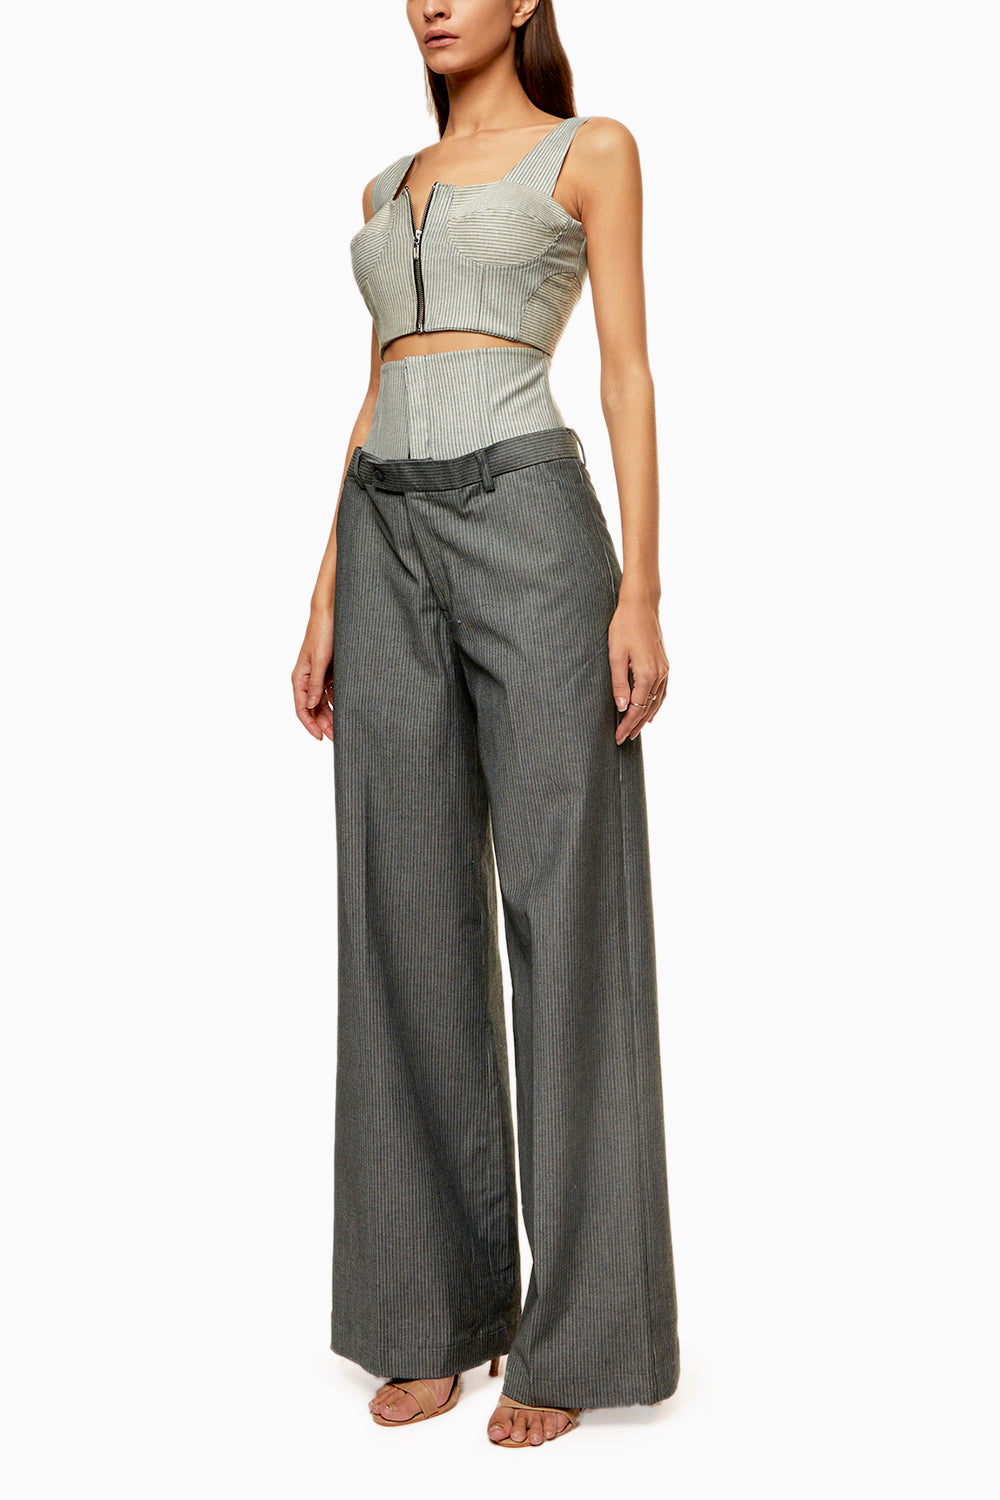 Deme By Gabriella, Silver Shimmer Bralette And Pants